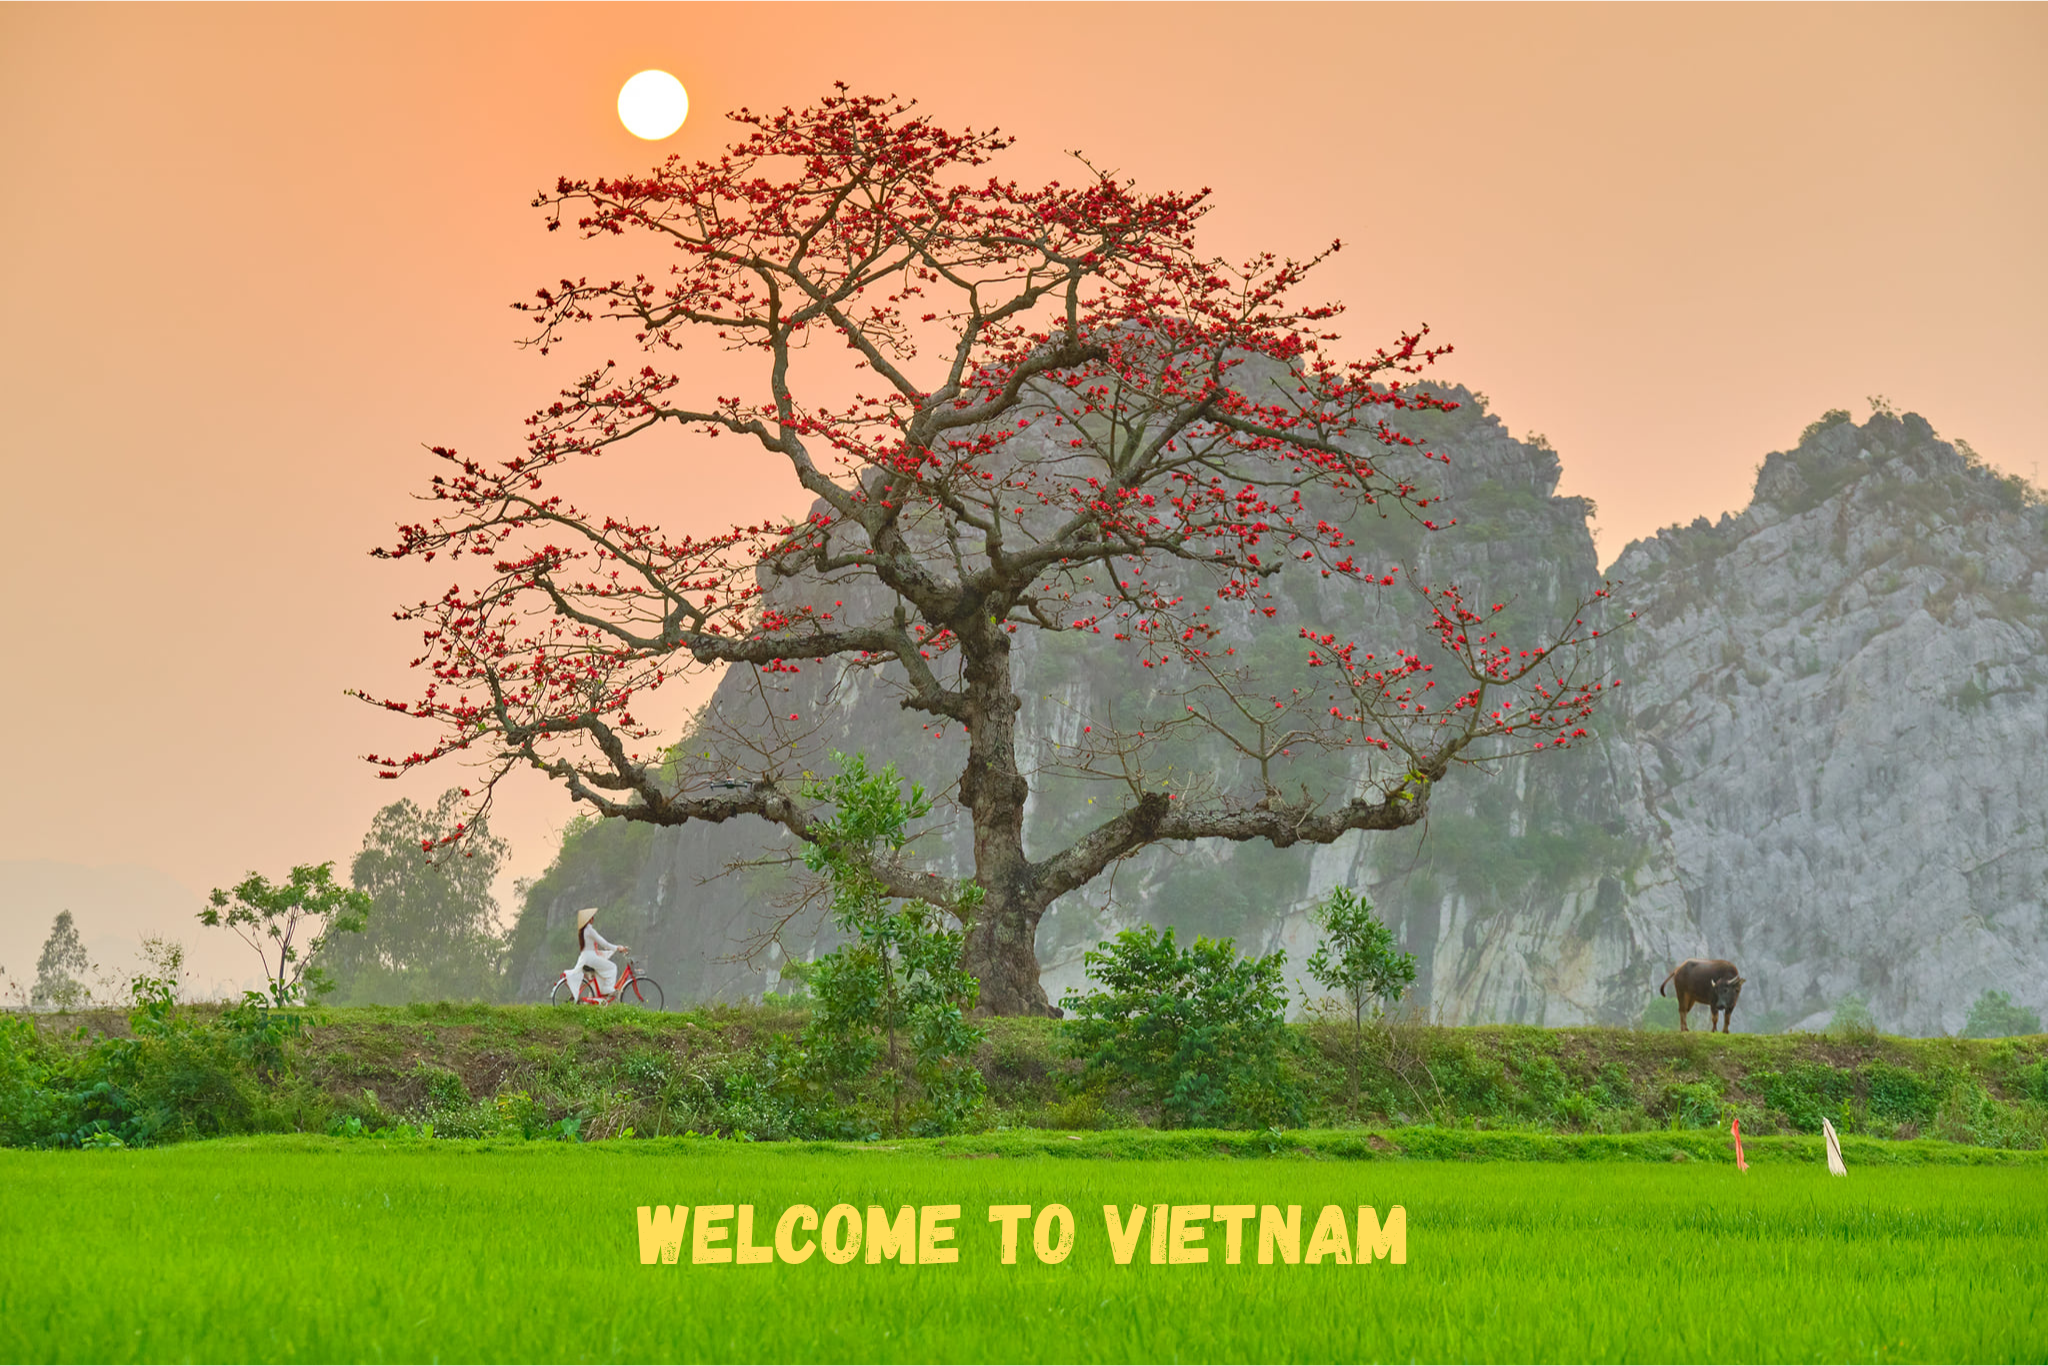 Get ready for the Vietnam trip!